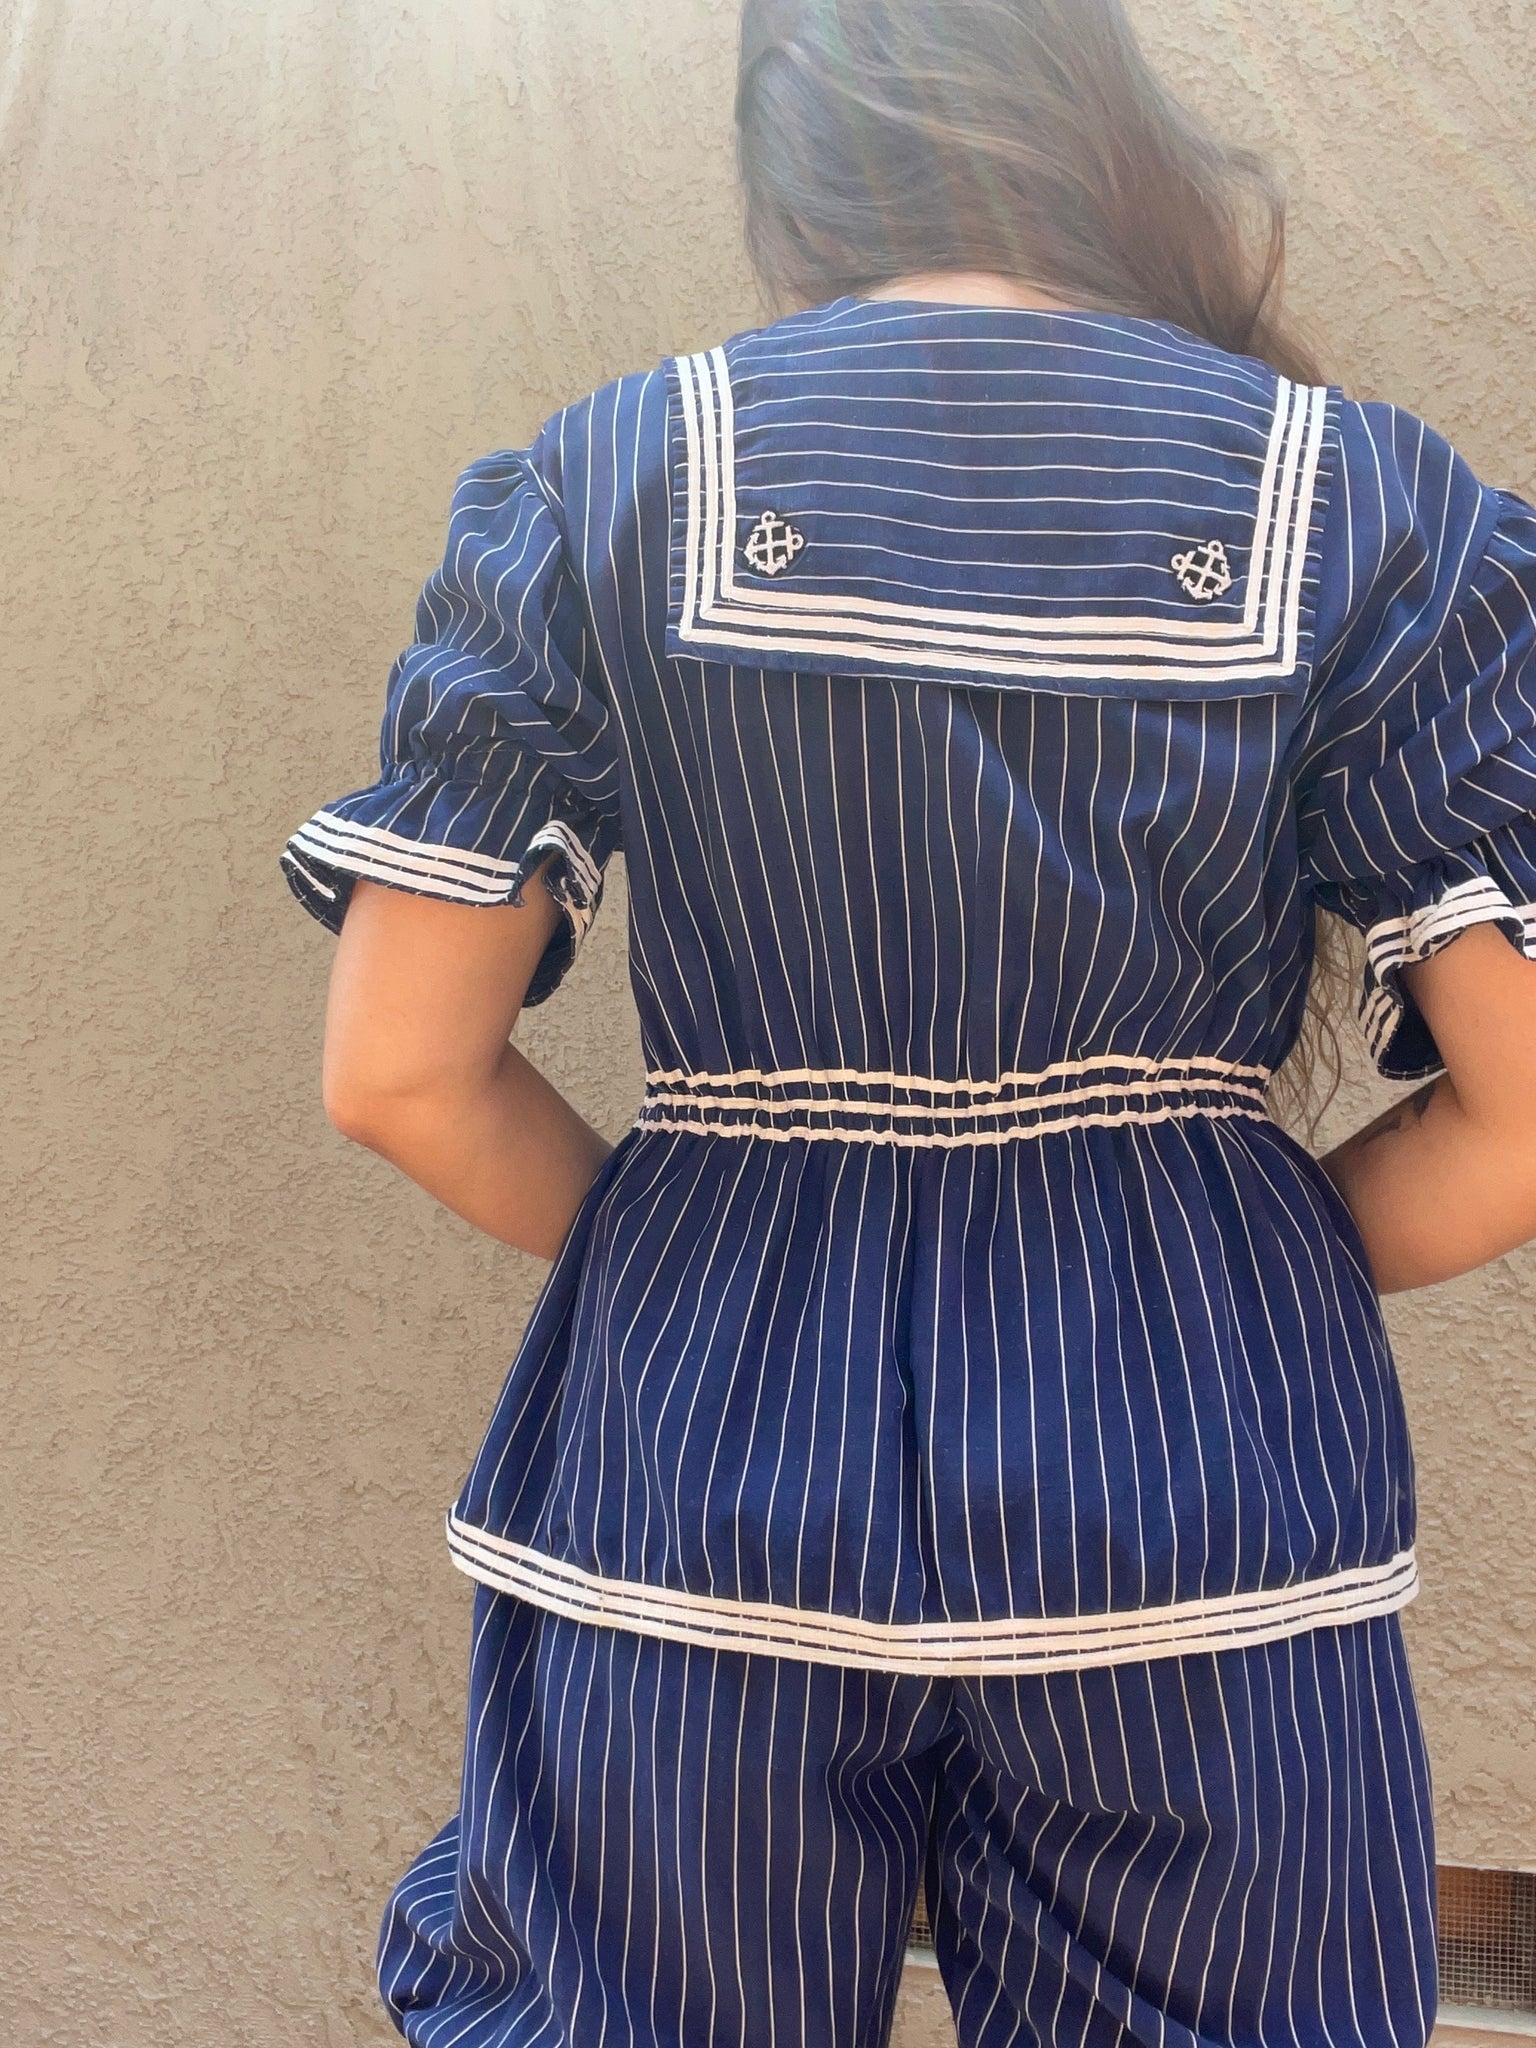 Late 1800s Striped Swimsuit Made Circa 1930s-2 Piece Jumpsuit + Hat